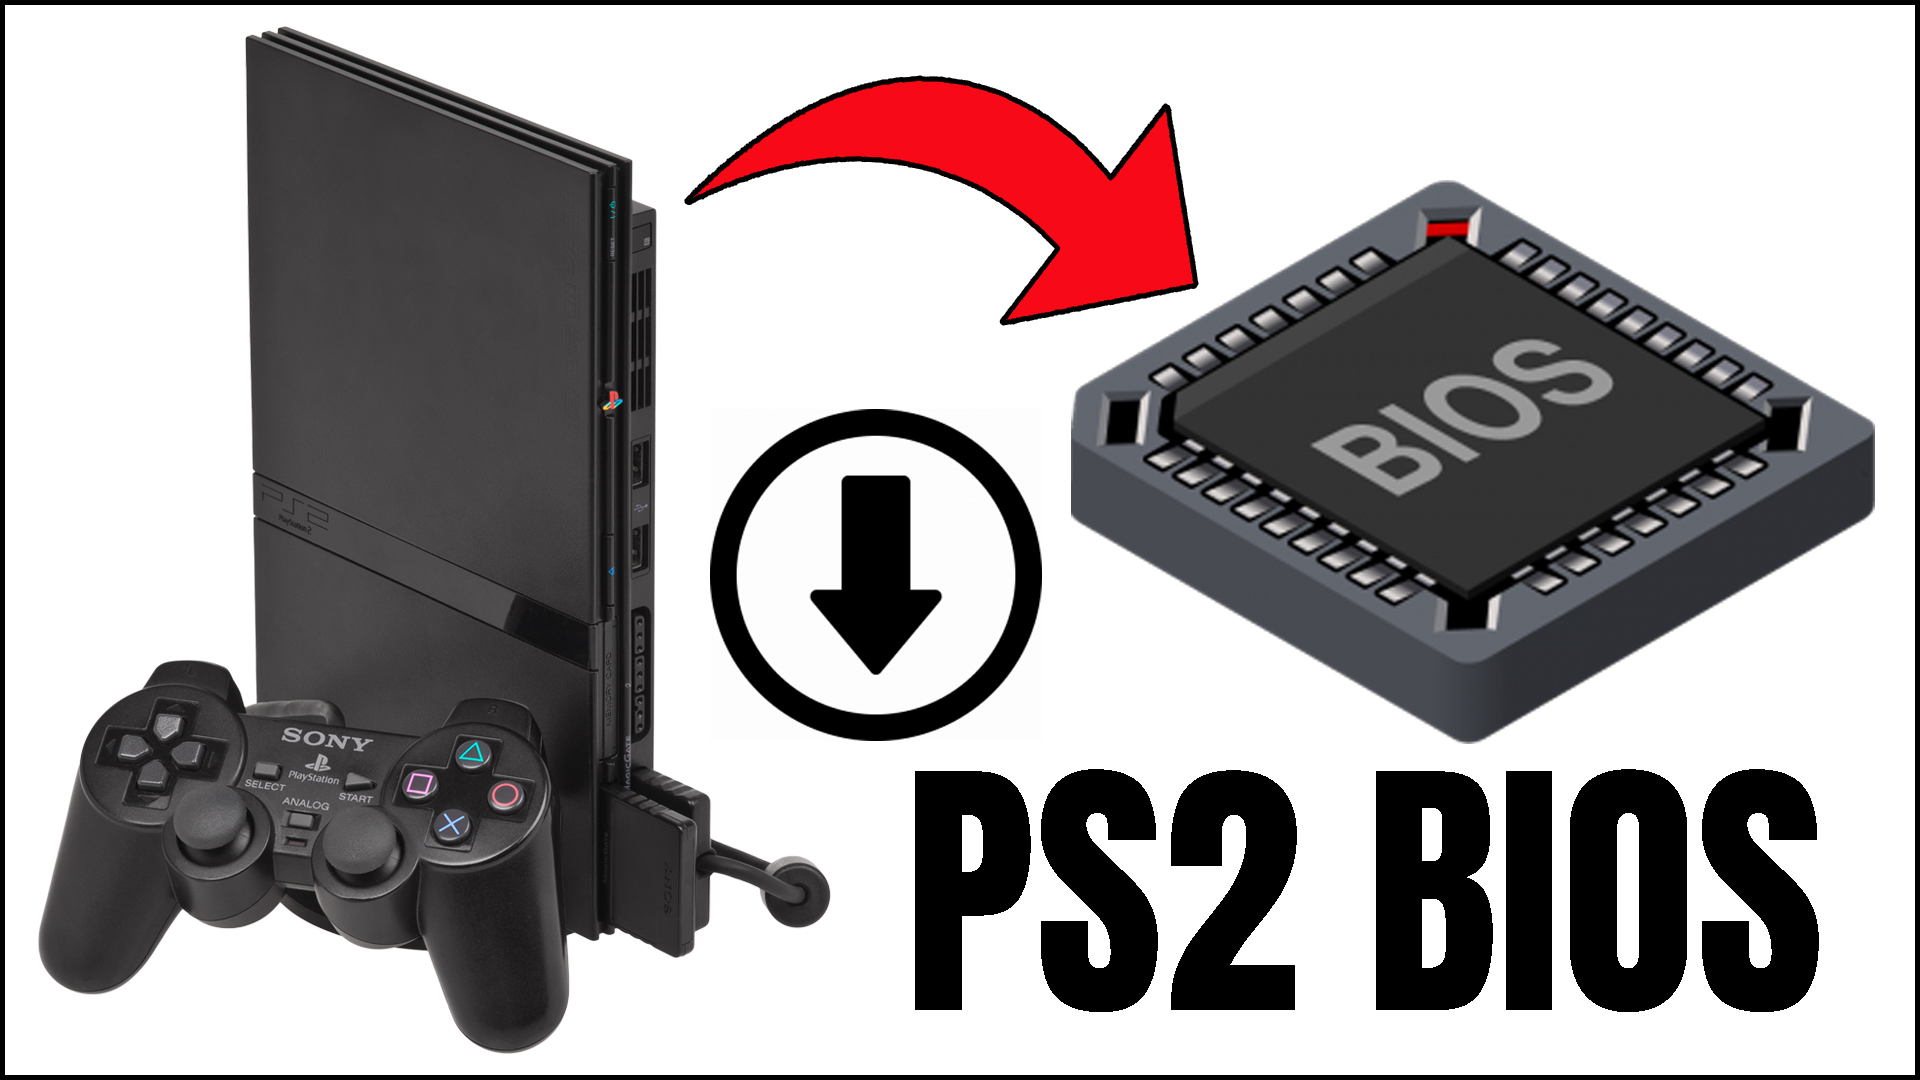 download ps2 bios all